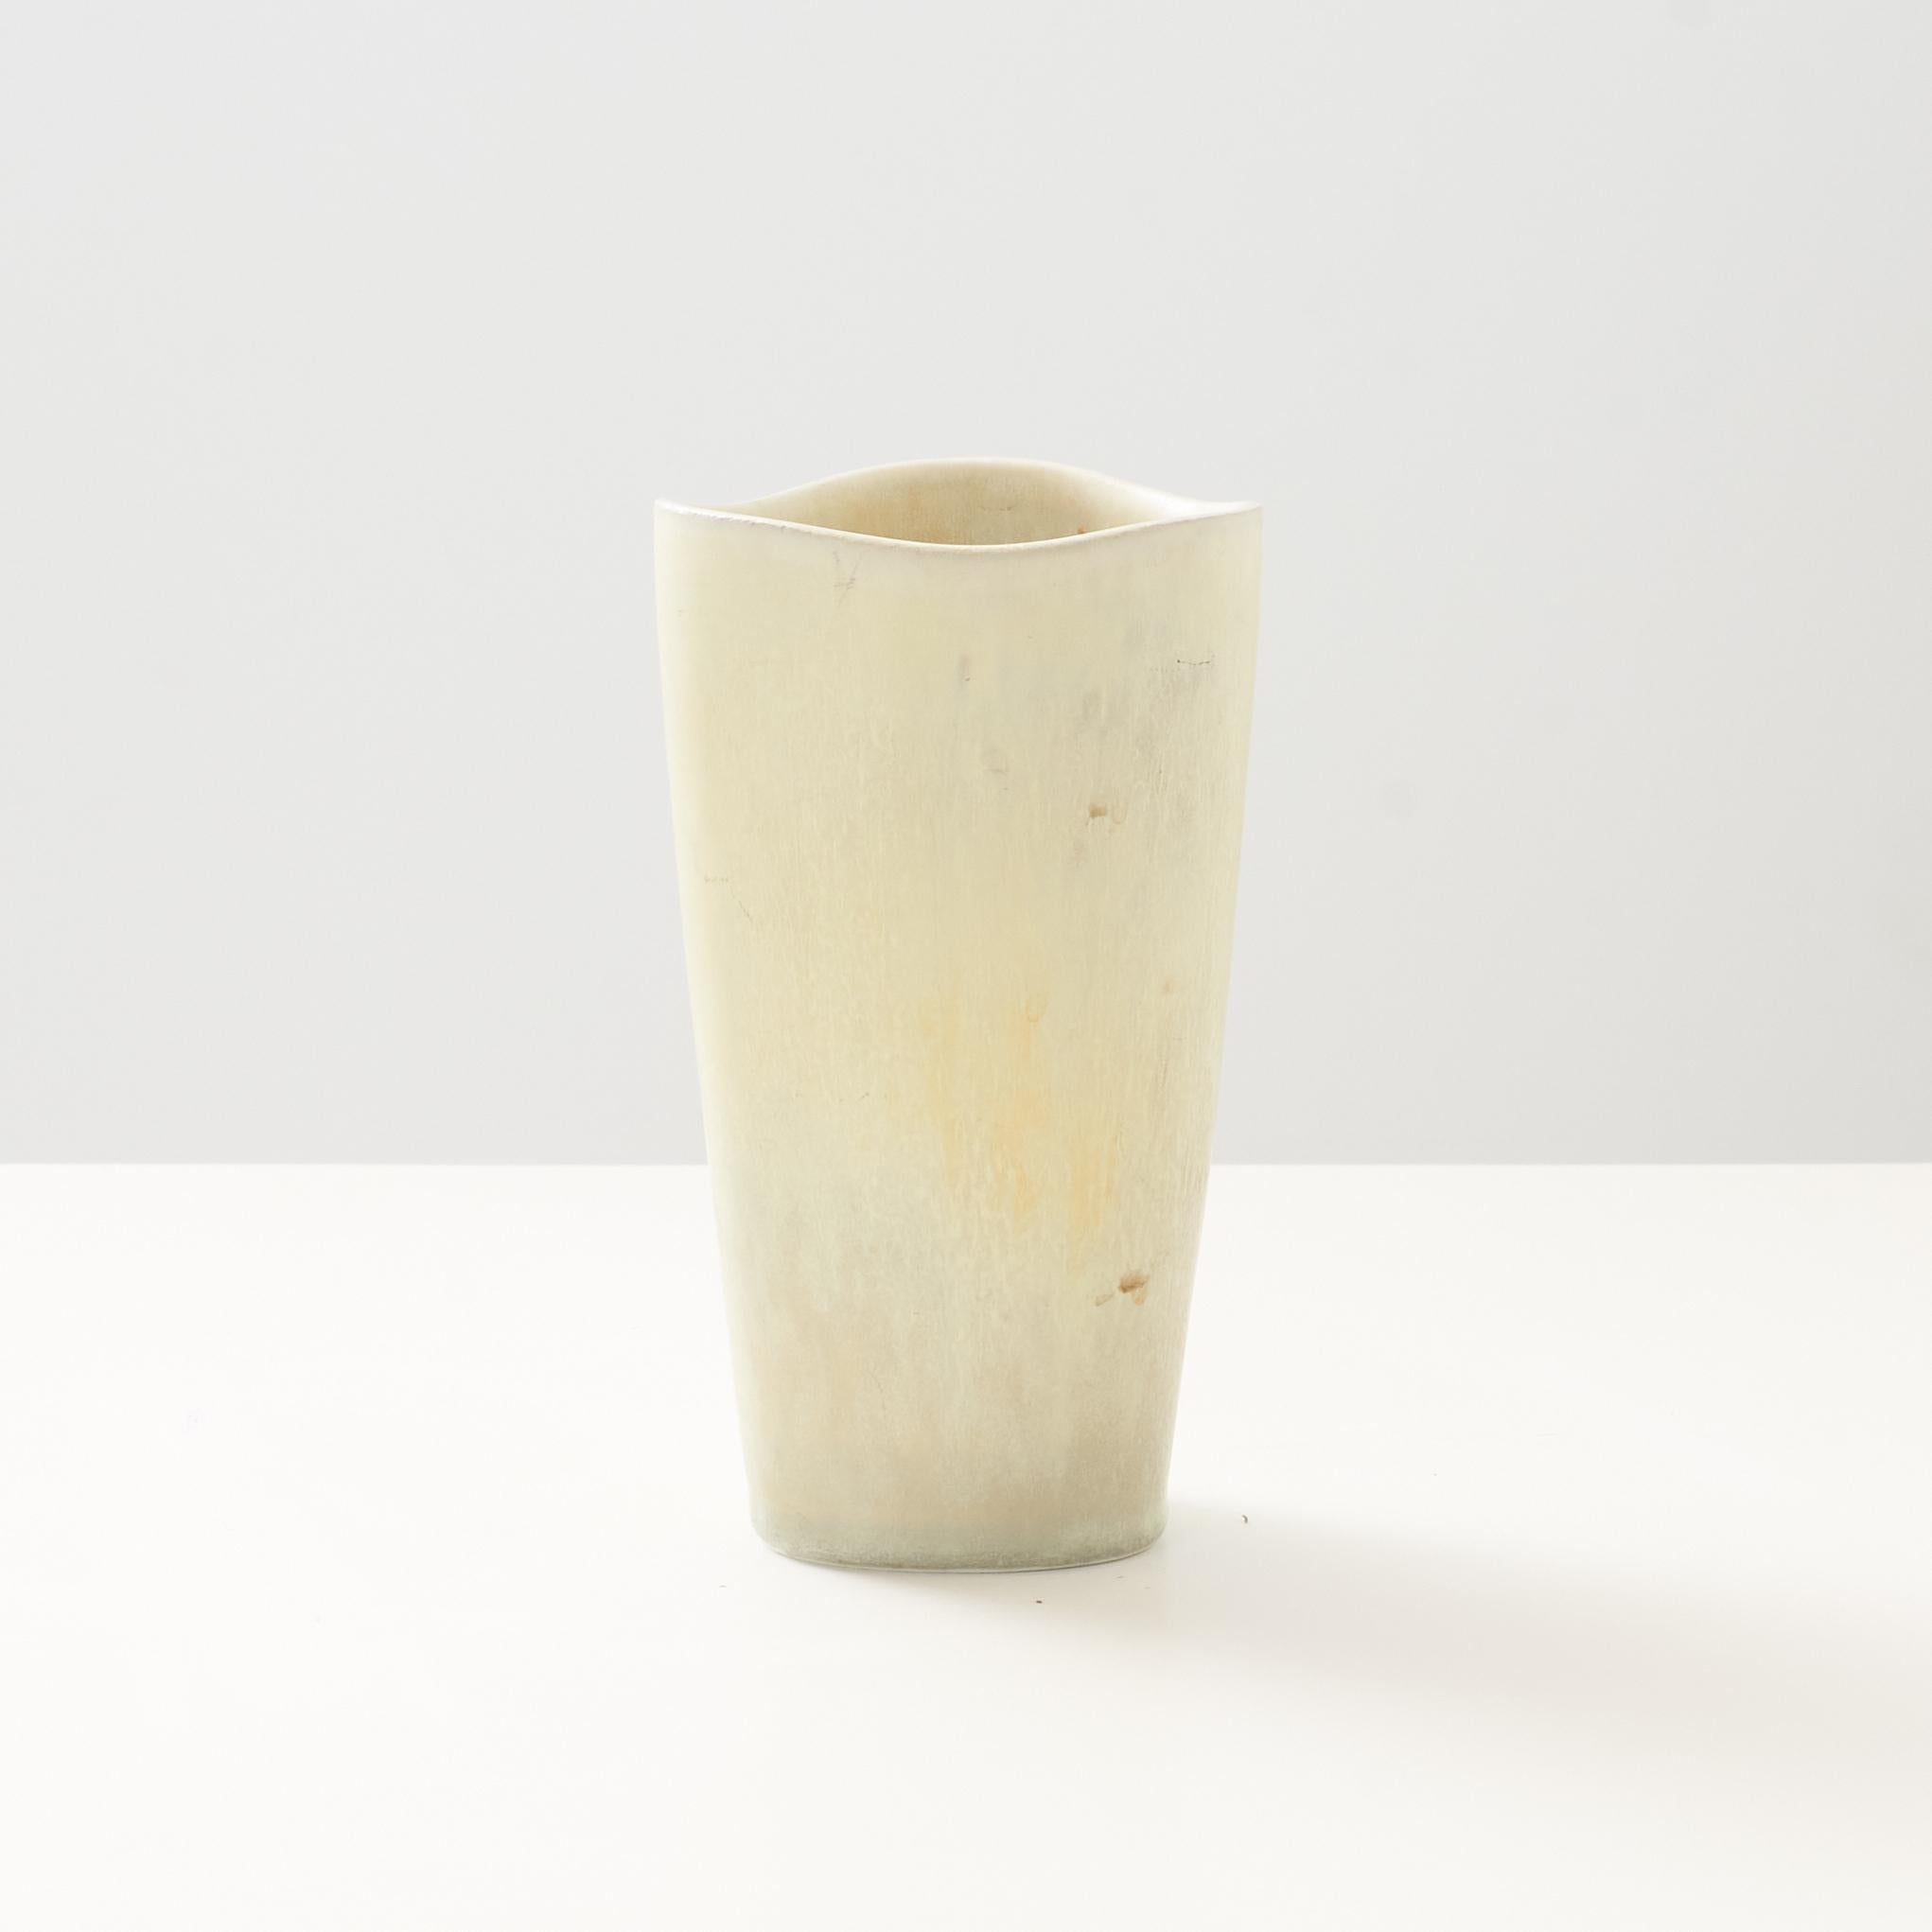 A tall triangular vase in soft yellows by Gunnar Nylund for Rorstrand. Etched on base with the Rörstrand R and 3 crowns, GN, ASK.

Very good vintage condition. No chips or cracks in the glaze.